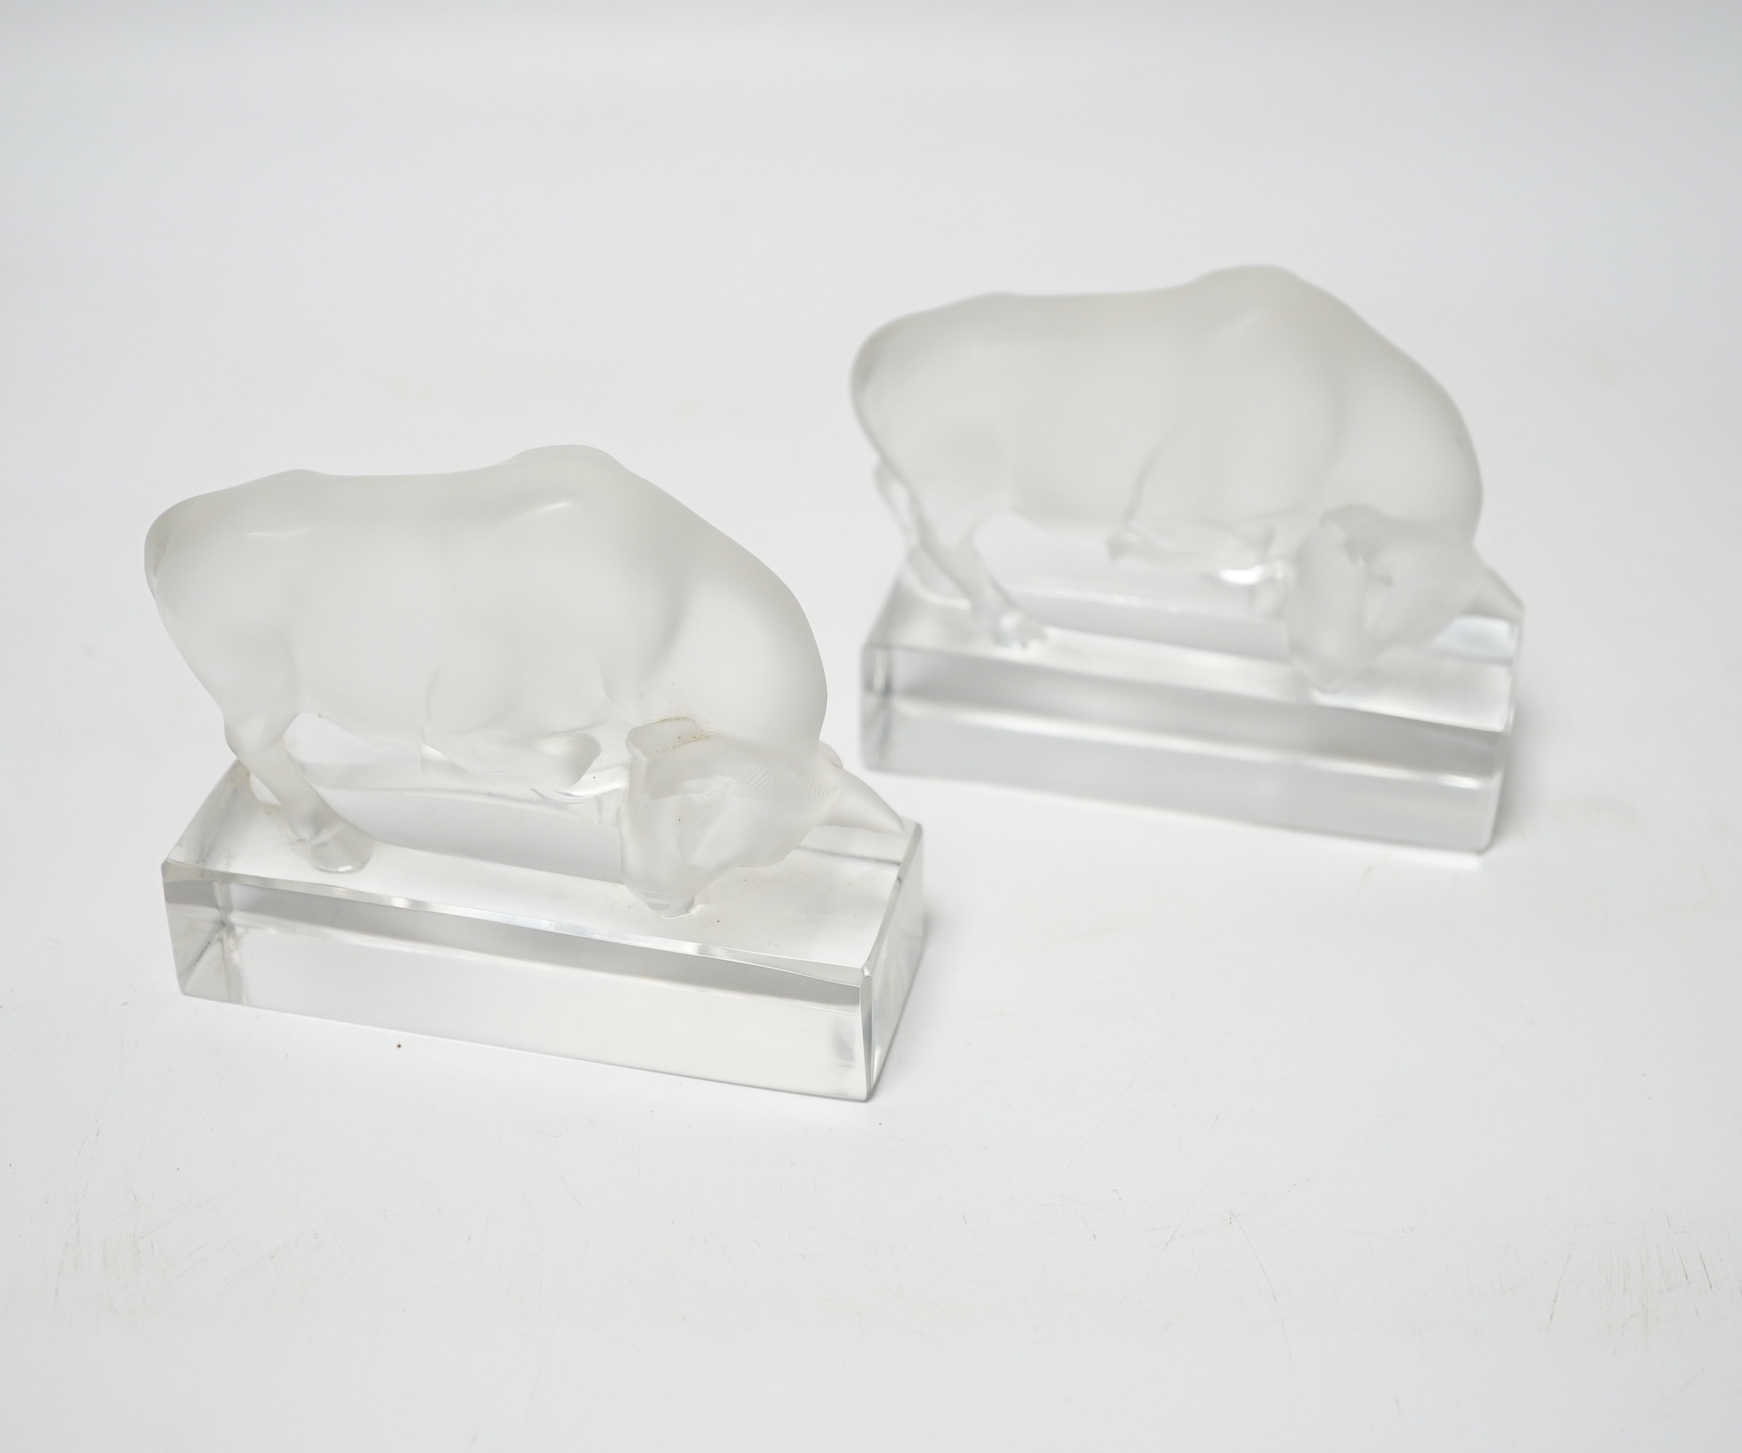 Rene Lalique, two frosted glass paperweights modelled as a bull, signed ‘Lalique France’ to base, 9cm high                                                                                                                  